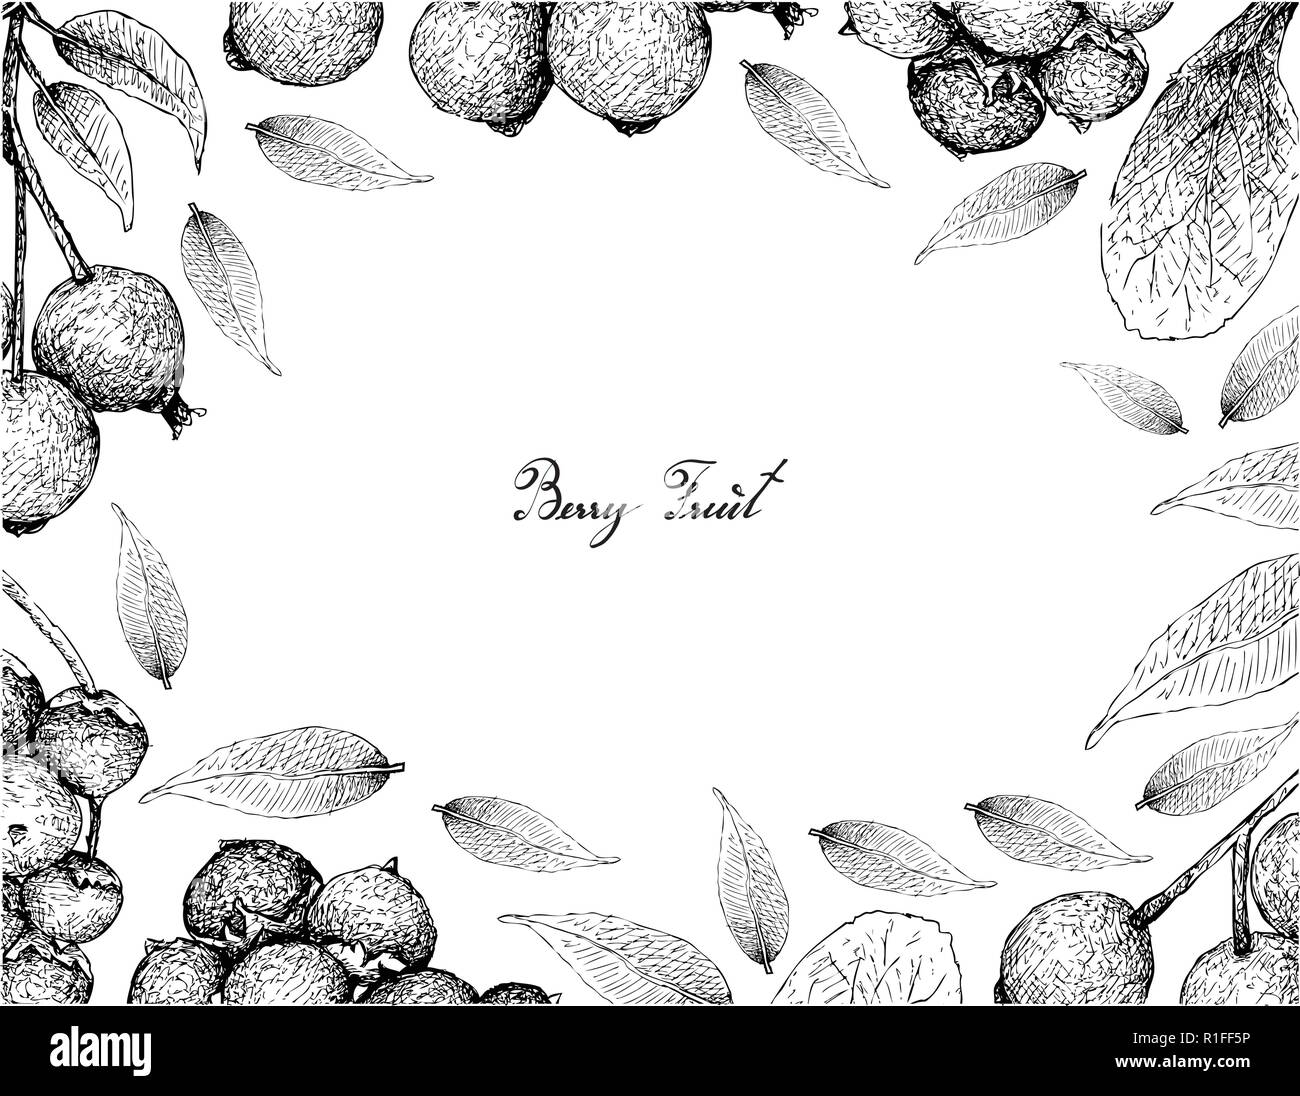 Berry Fruit, Illustration Frame of Hand Drawn Sketch of Jostaberries and Magenta Lilly Pilly, Magenta Cherry or Syzygium Paniculatum Fruits Isolated o Stock Vector